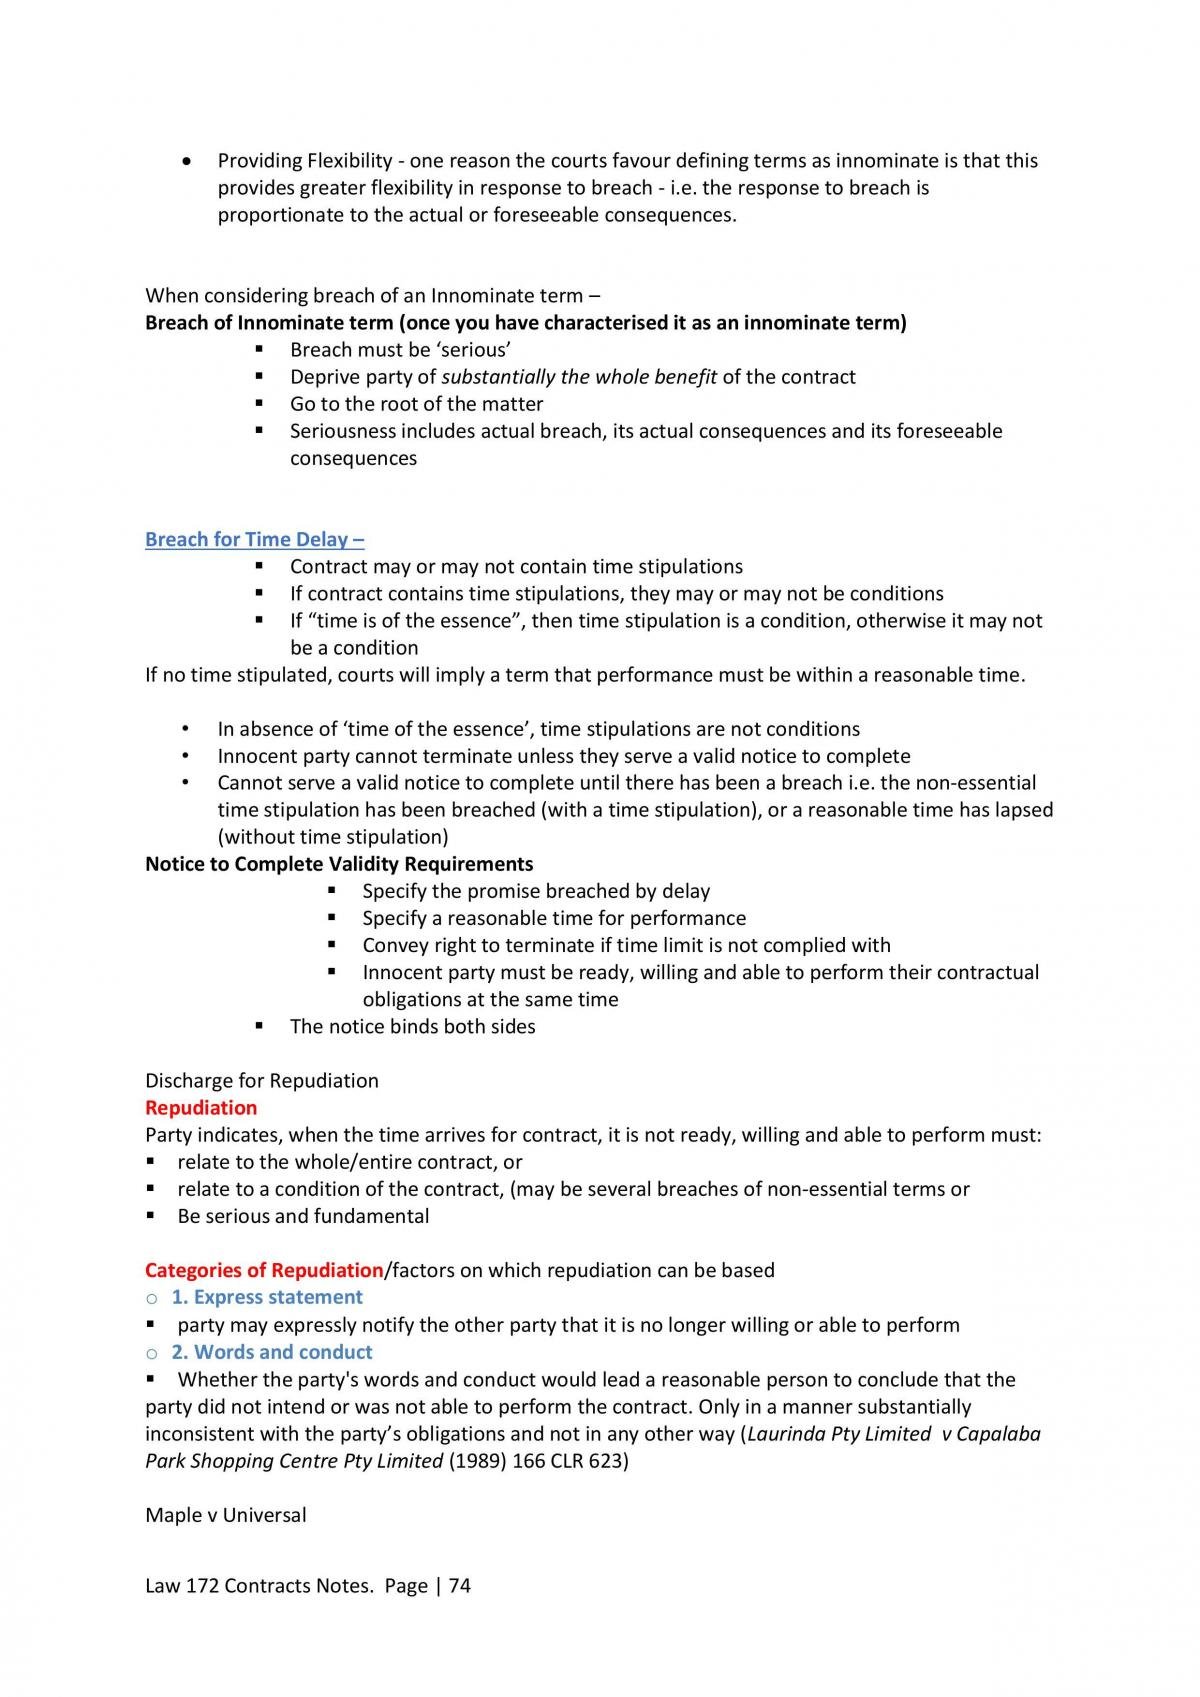 LAW172 Contract Law full study notes - Page 74